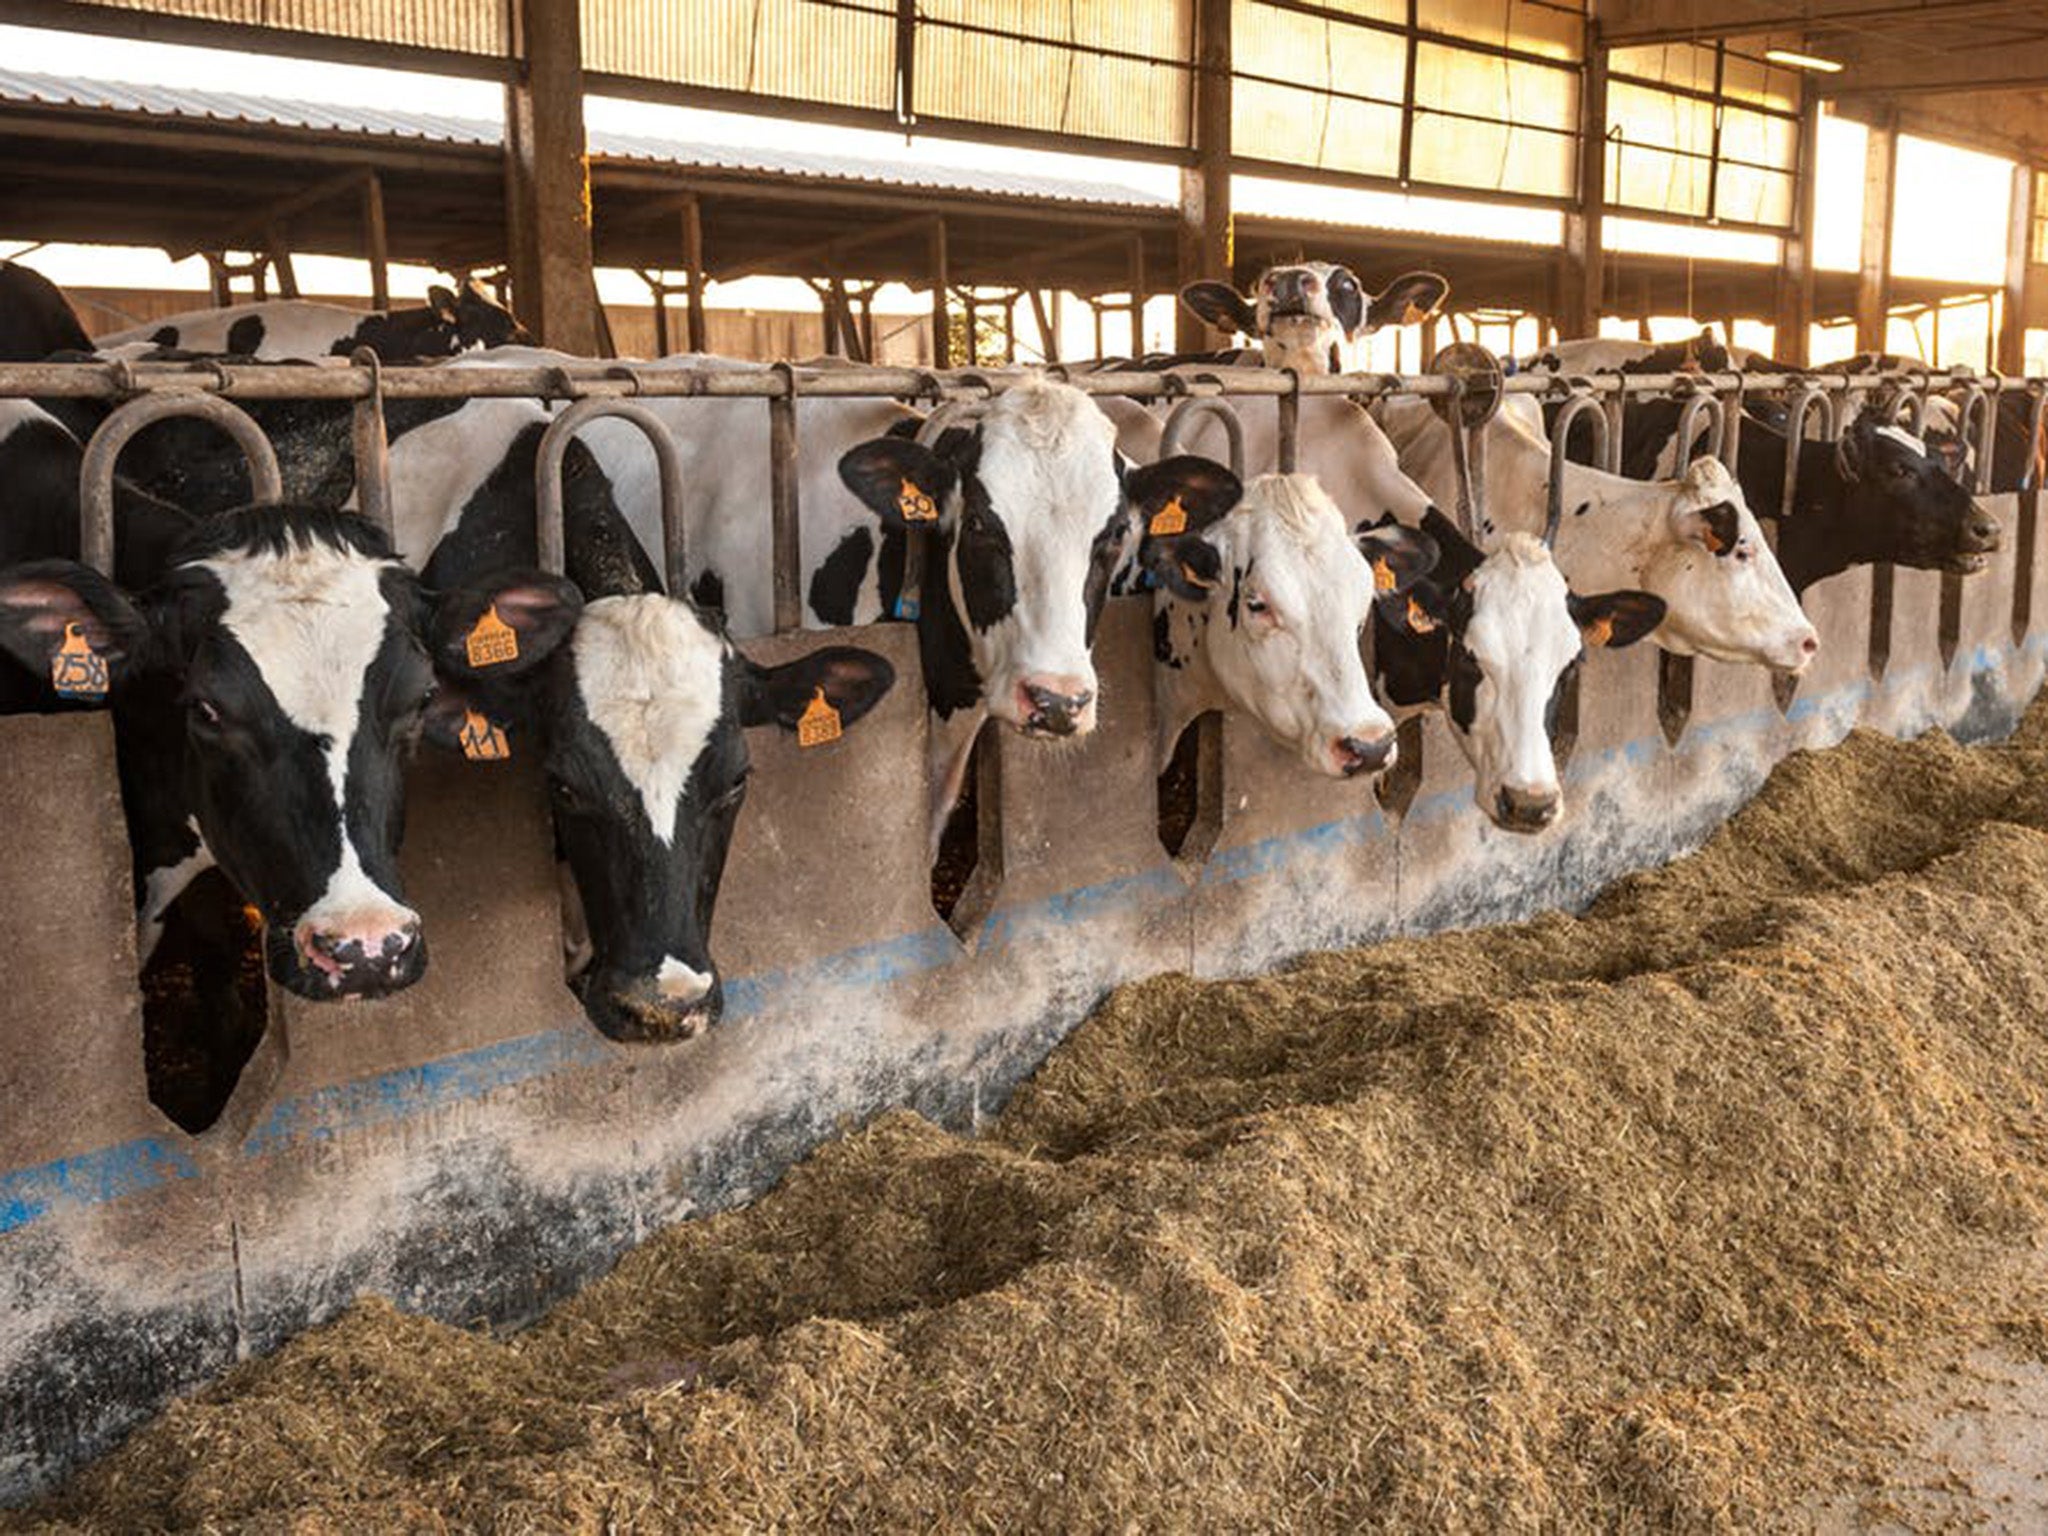 Heat stress in cows occurs when ambient temperature and humidity go above animal specific thresholds